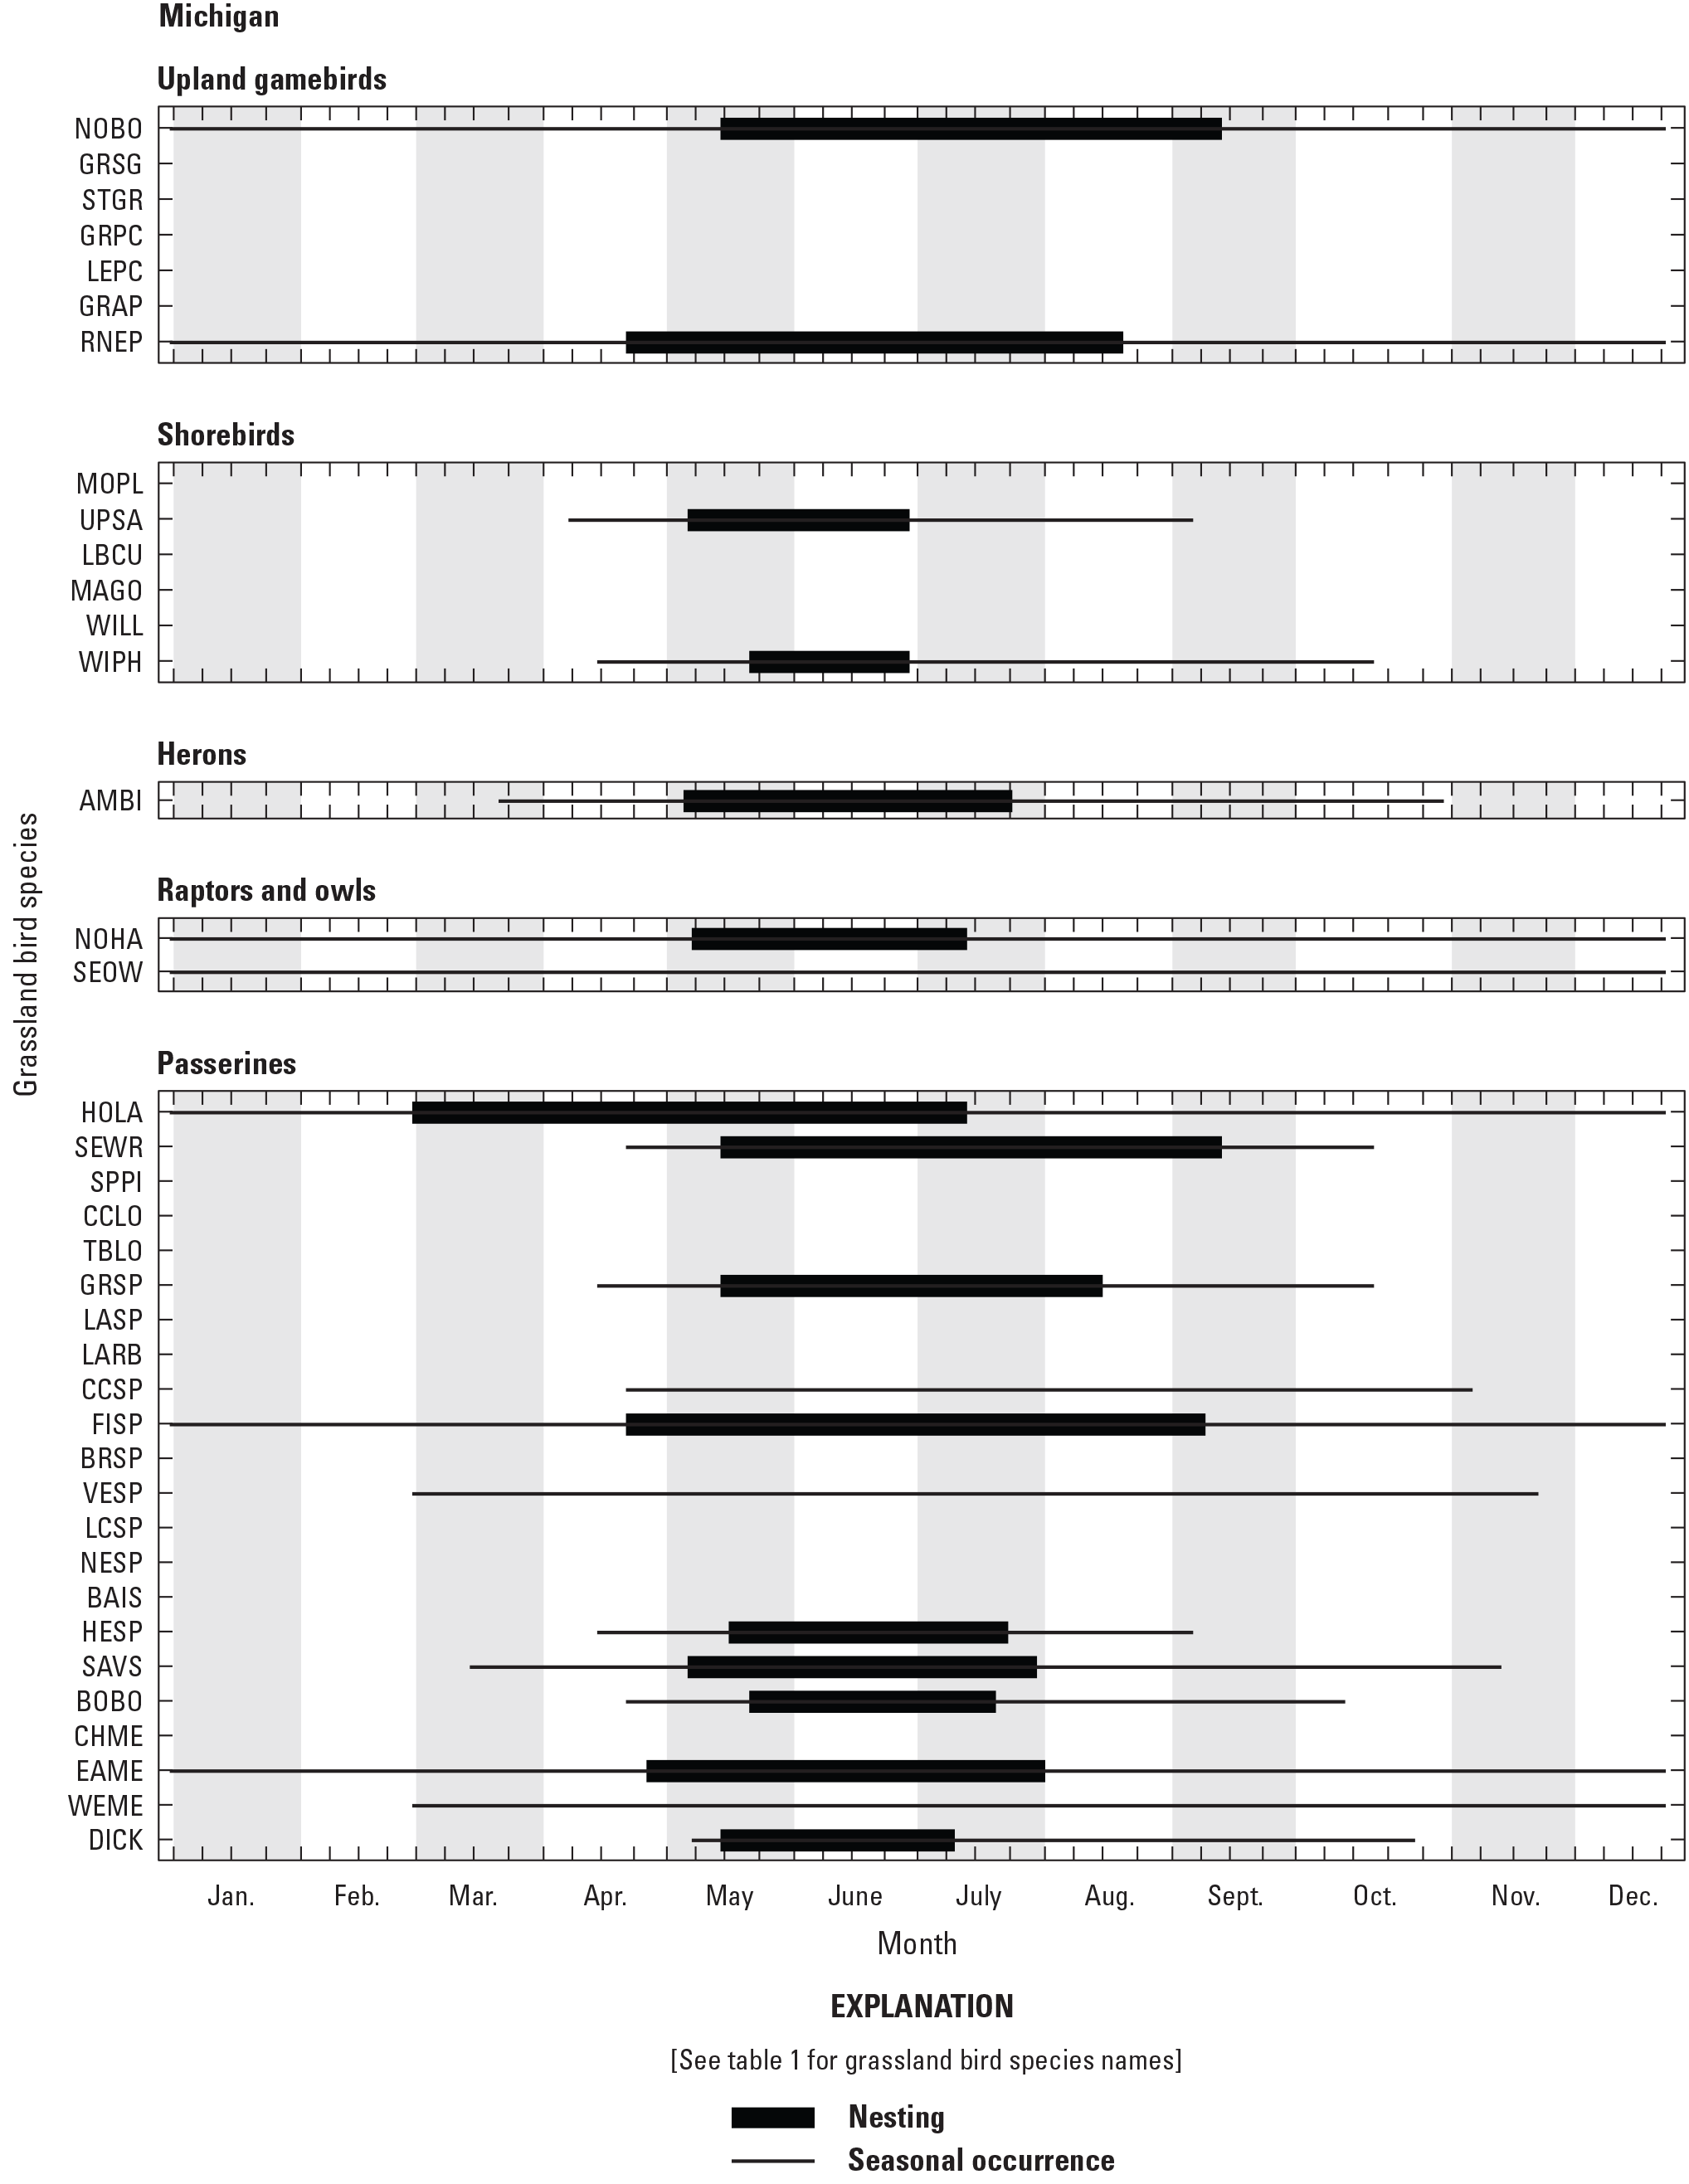 Figure showing seasonal occurrence and nesting phenology for 38 grassland bird species
               in Michigan, United States.